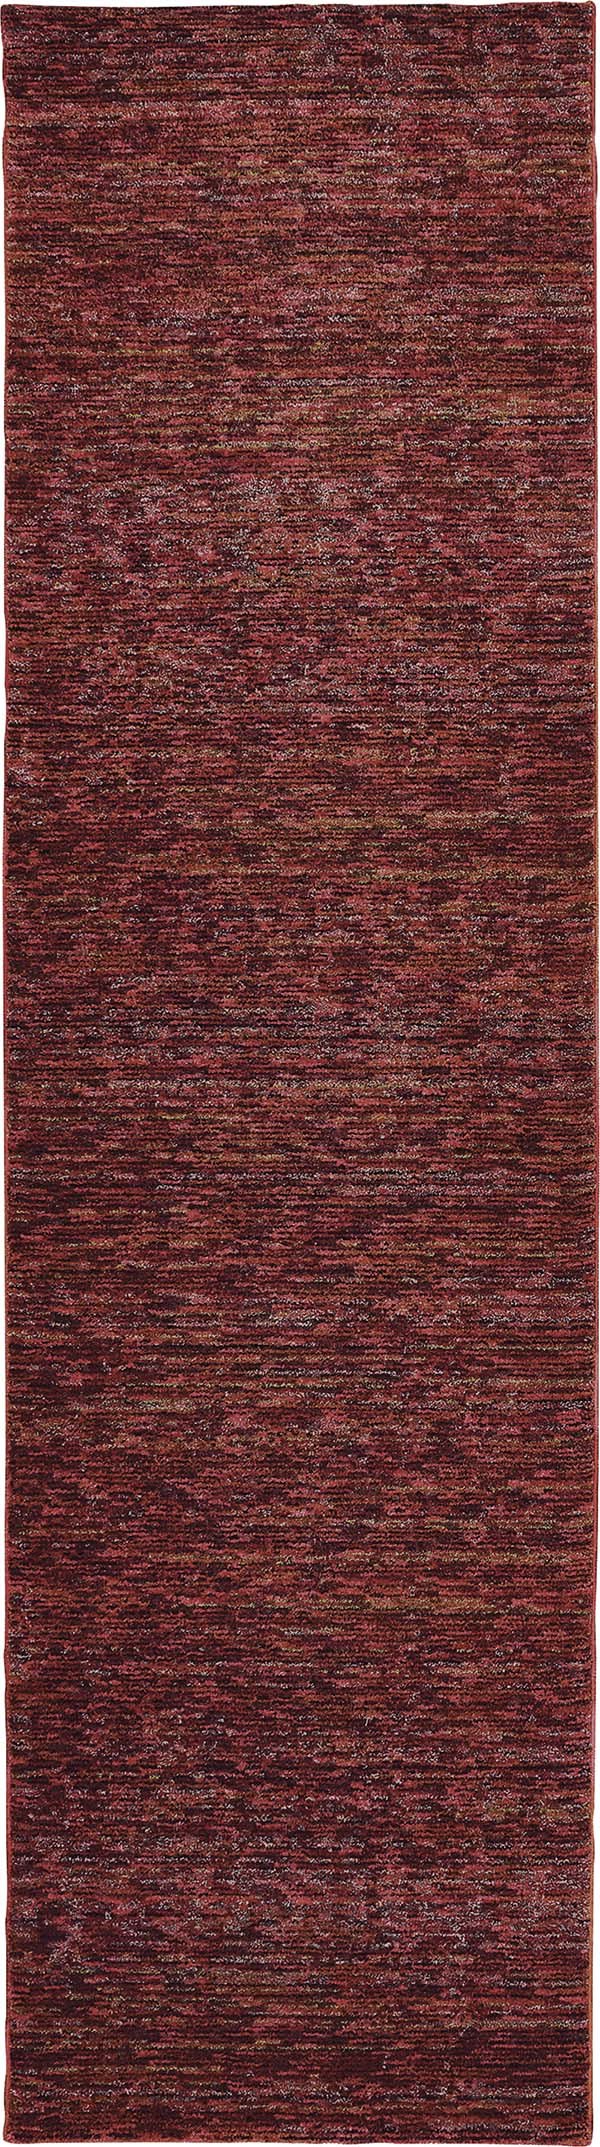 refined carpet rugs oriental weavers area rugs online rug store atlas collection 8033k rug store orange county contemporary area rugs orange county rug store